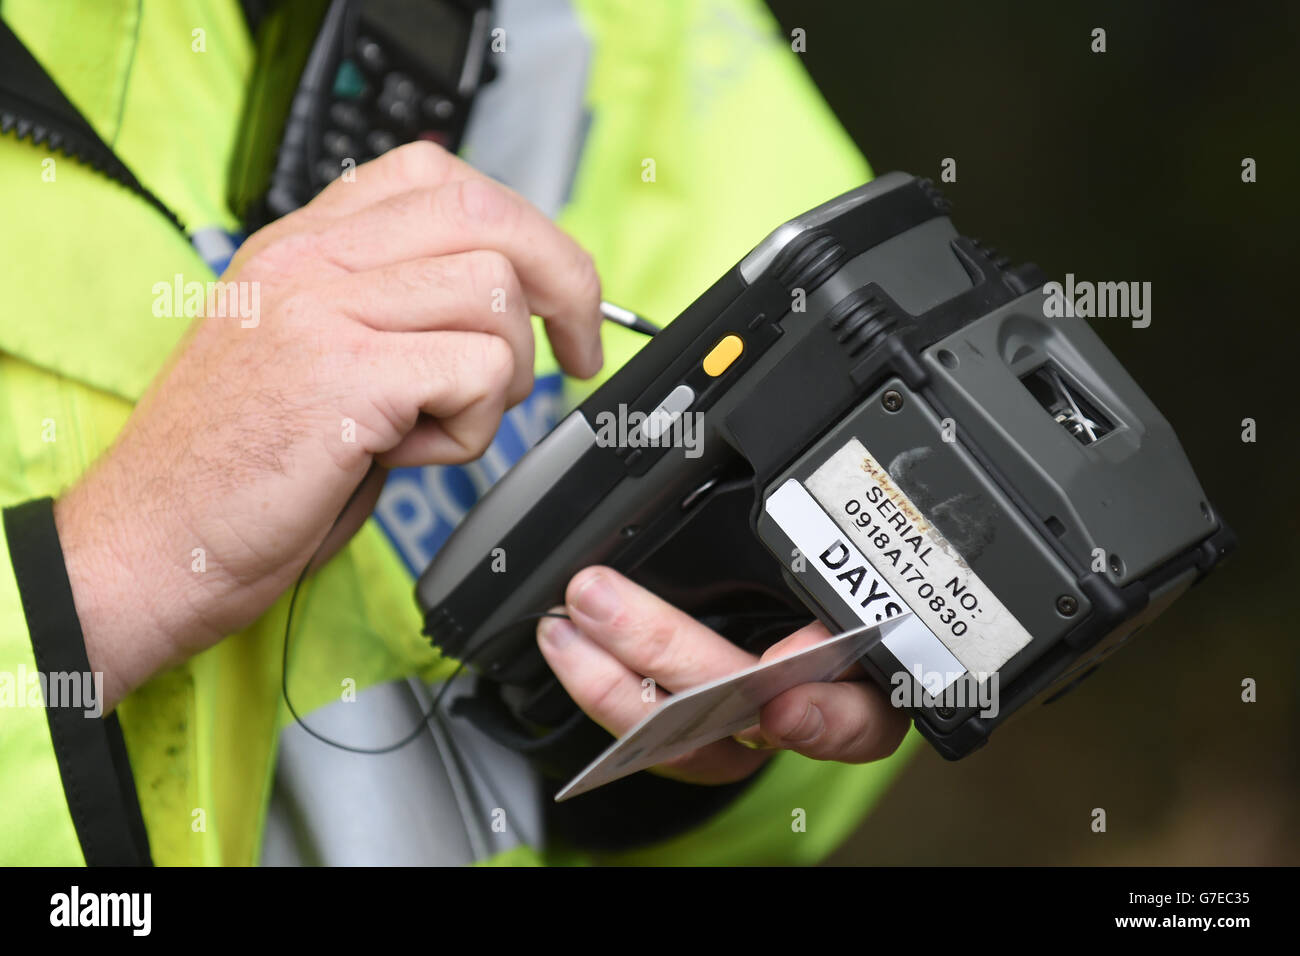 A police officer checks a drivers details on a mobile identification device Stock Photo